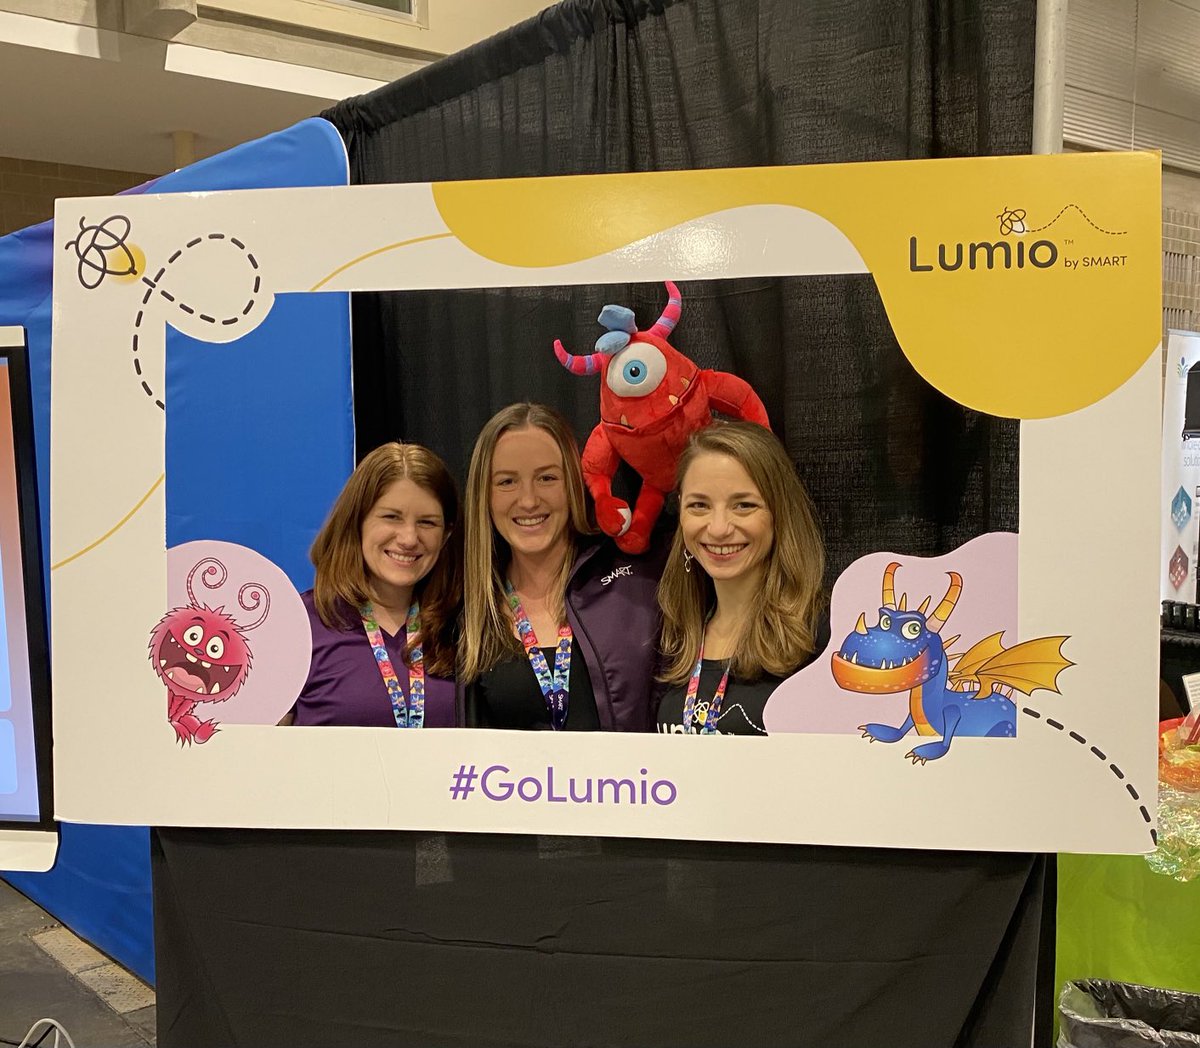 If you’re at ⁦@CommonGroundMD⁩, stop by the ⁦@SMART_Tech⁩⁩ booth to take your glamour shot with our ⁦@LumioSocial⁩ Photo Booth! #CGMD22 #edtech #education #goLumio